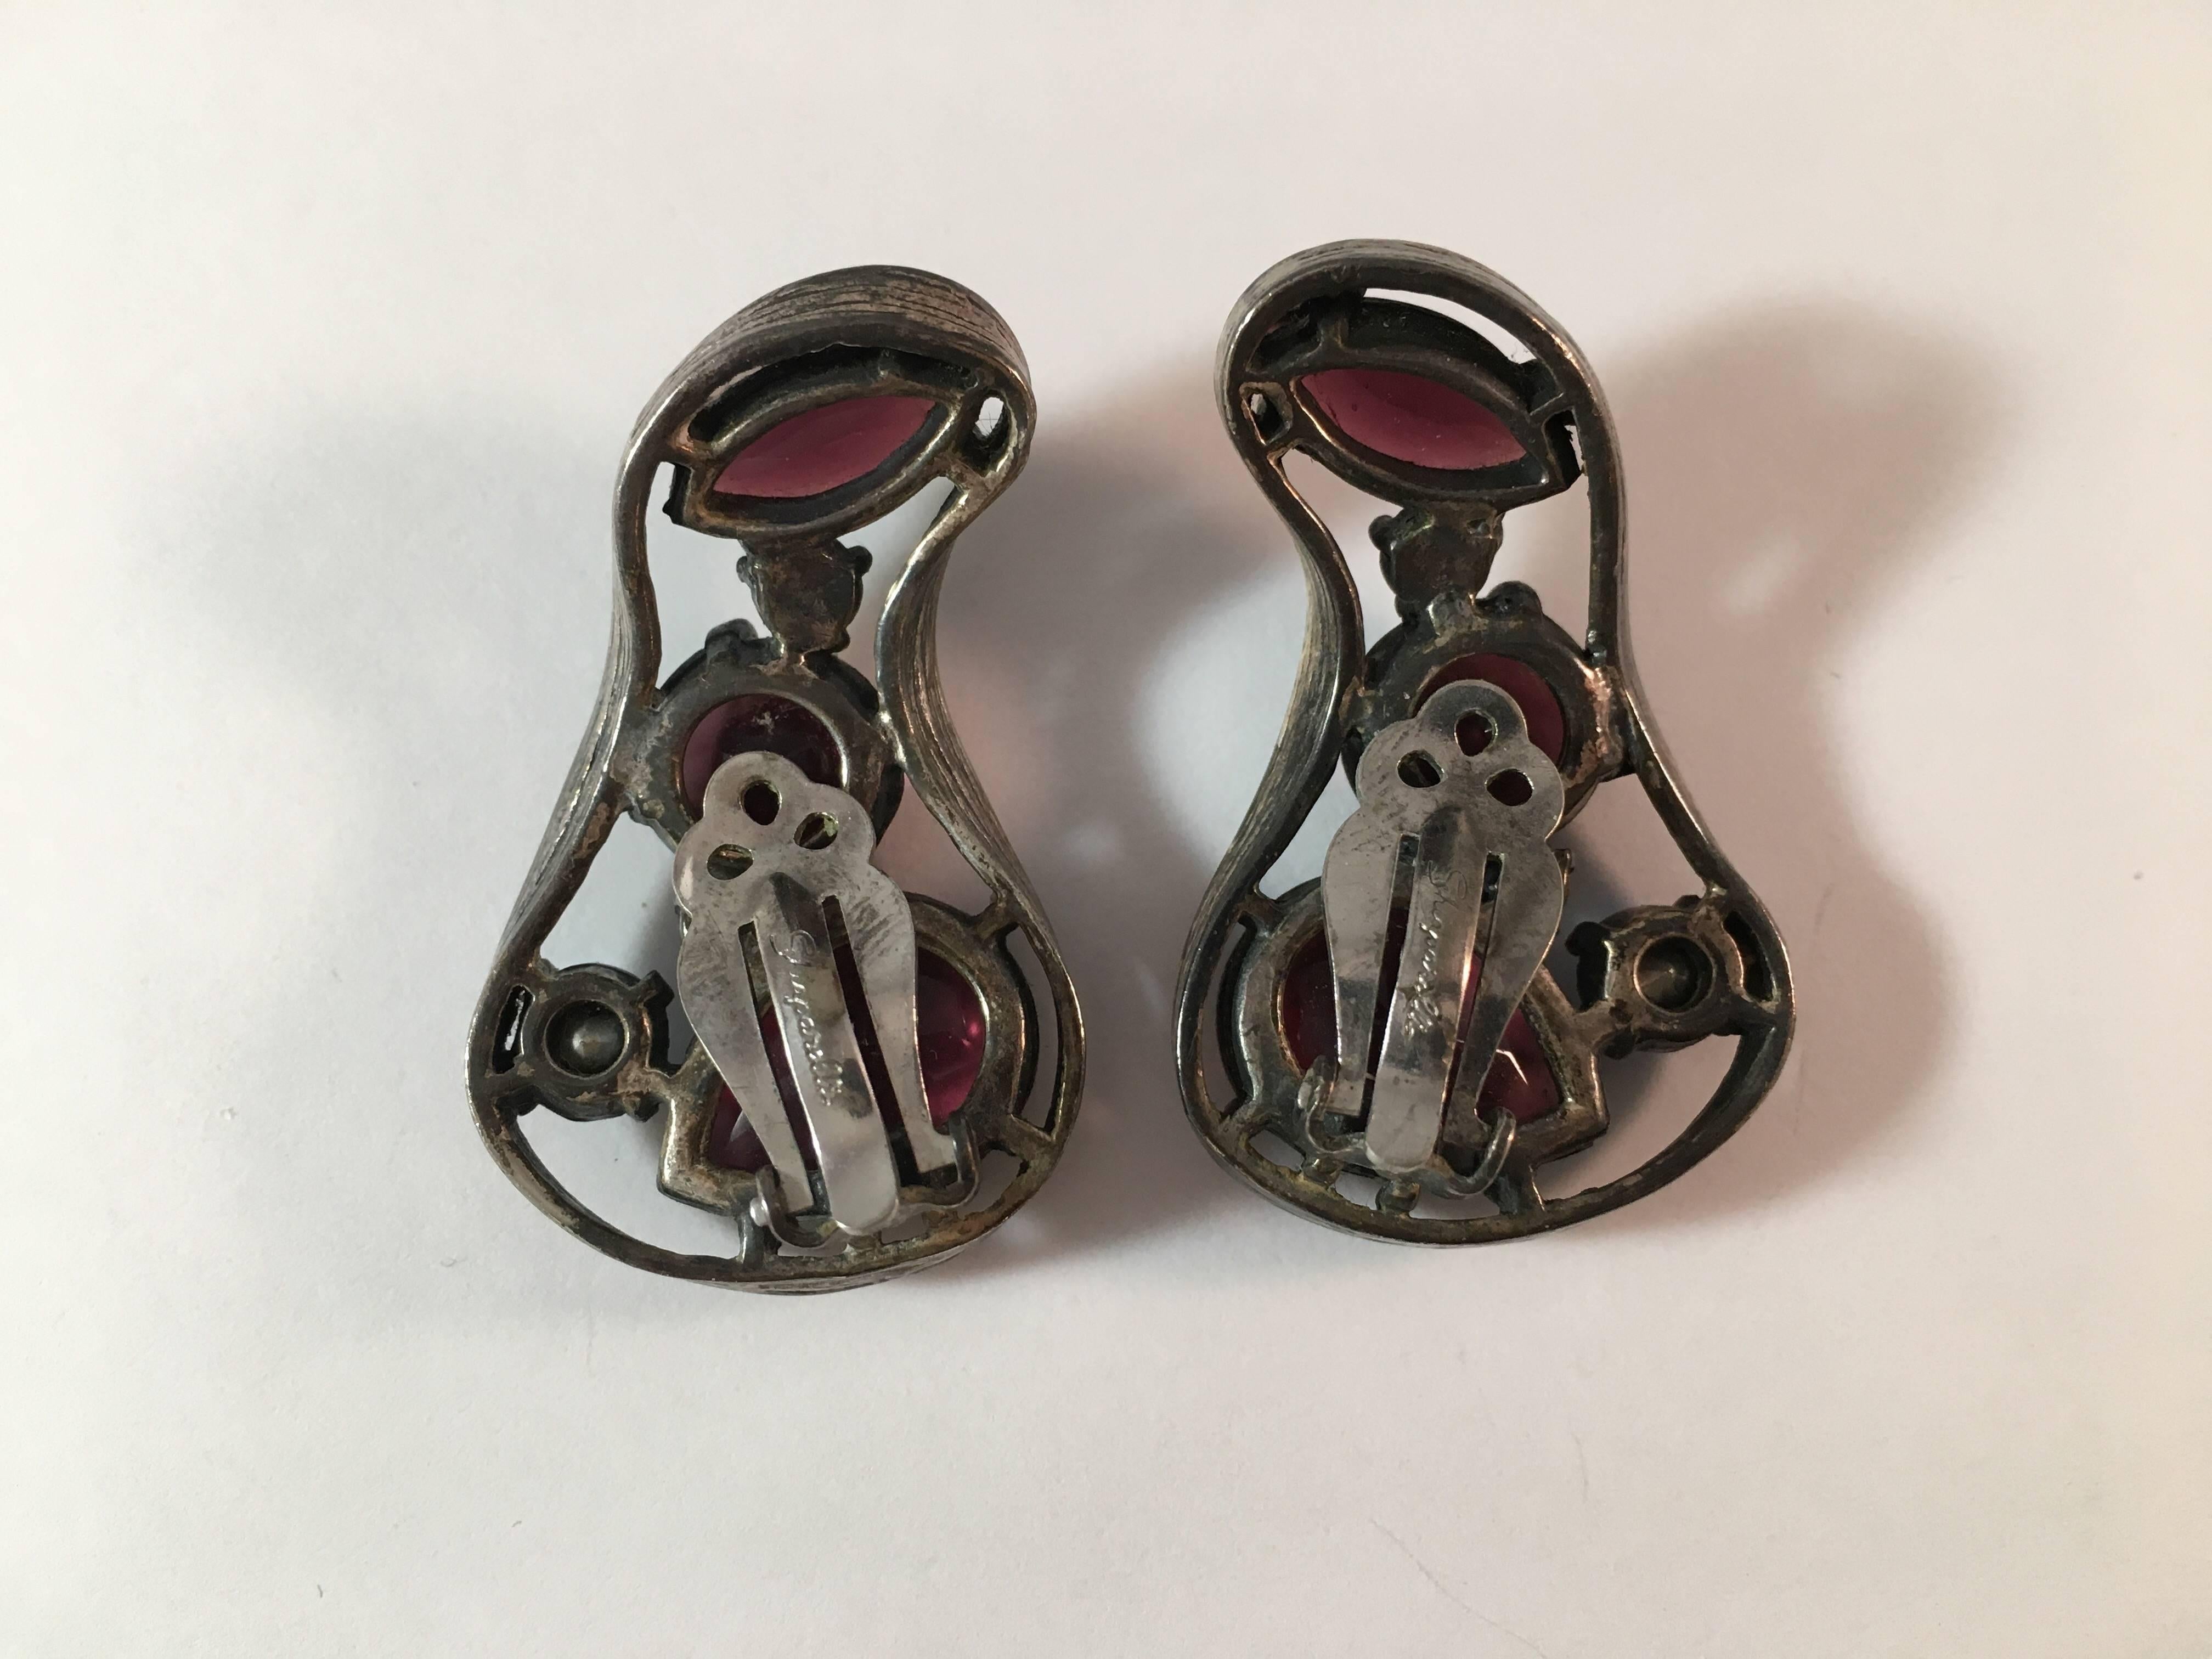 1940s Schiaparelli Biomorphic Shaped Earrings In Excellent Condition For Sale In Chicago, IL